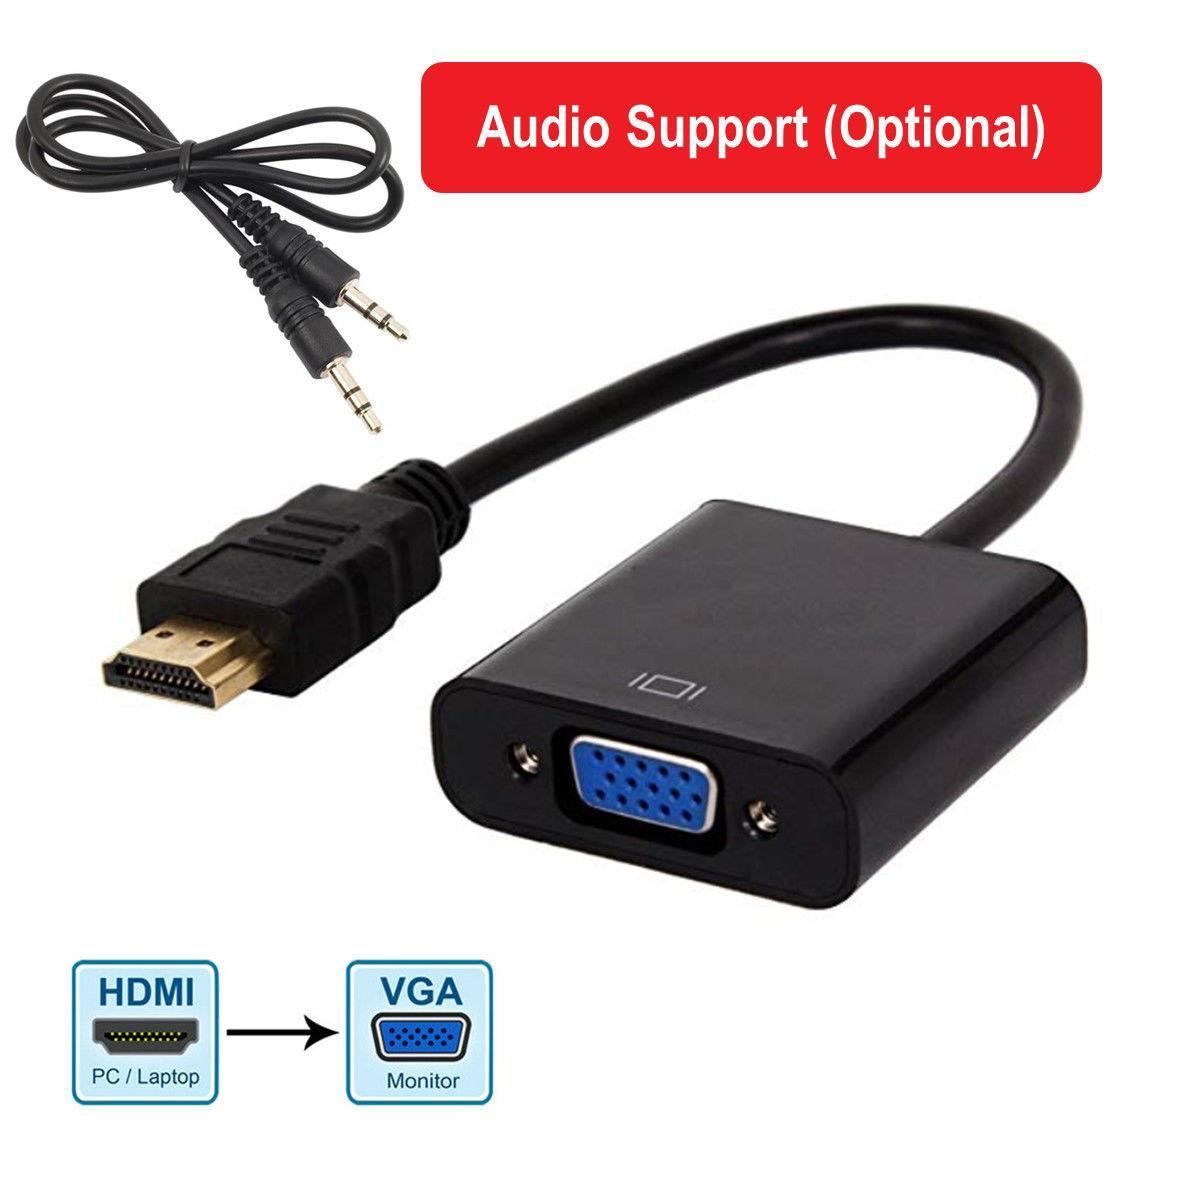 HDMI Male to VGA Female 1080p Adapter Video Cable Converter Audio Support